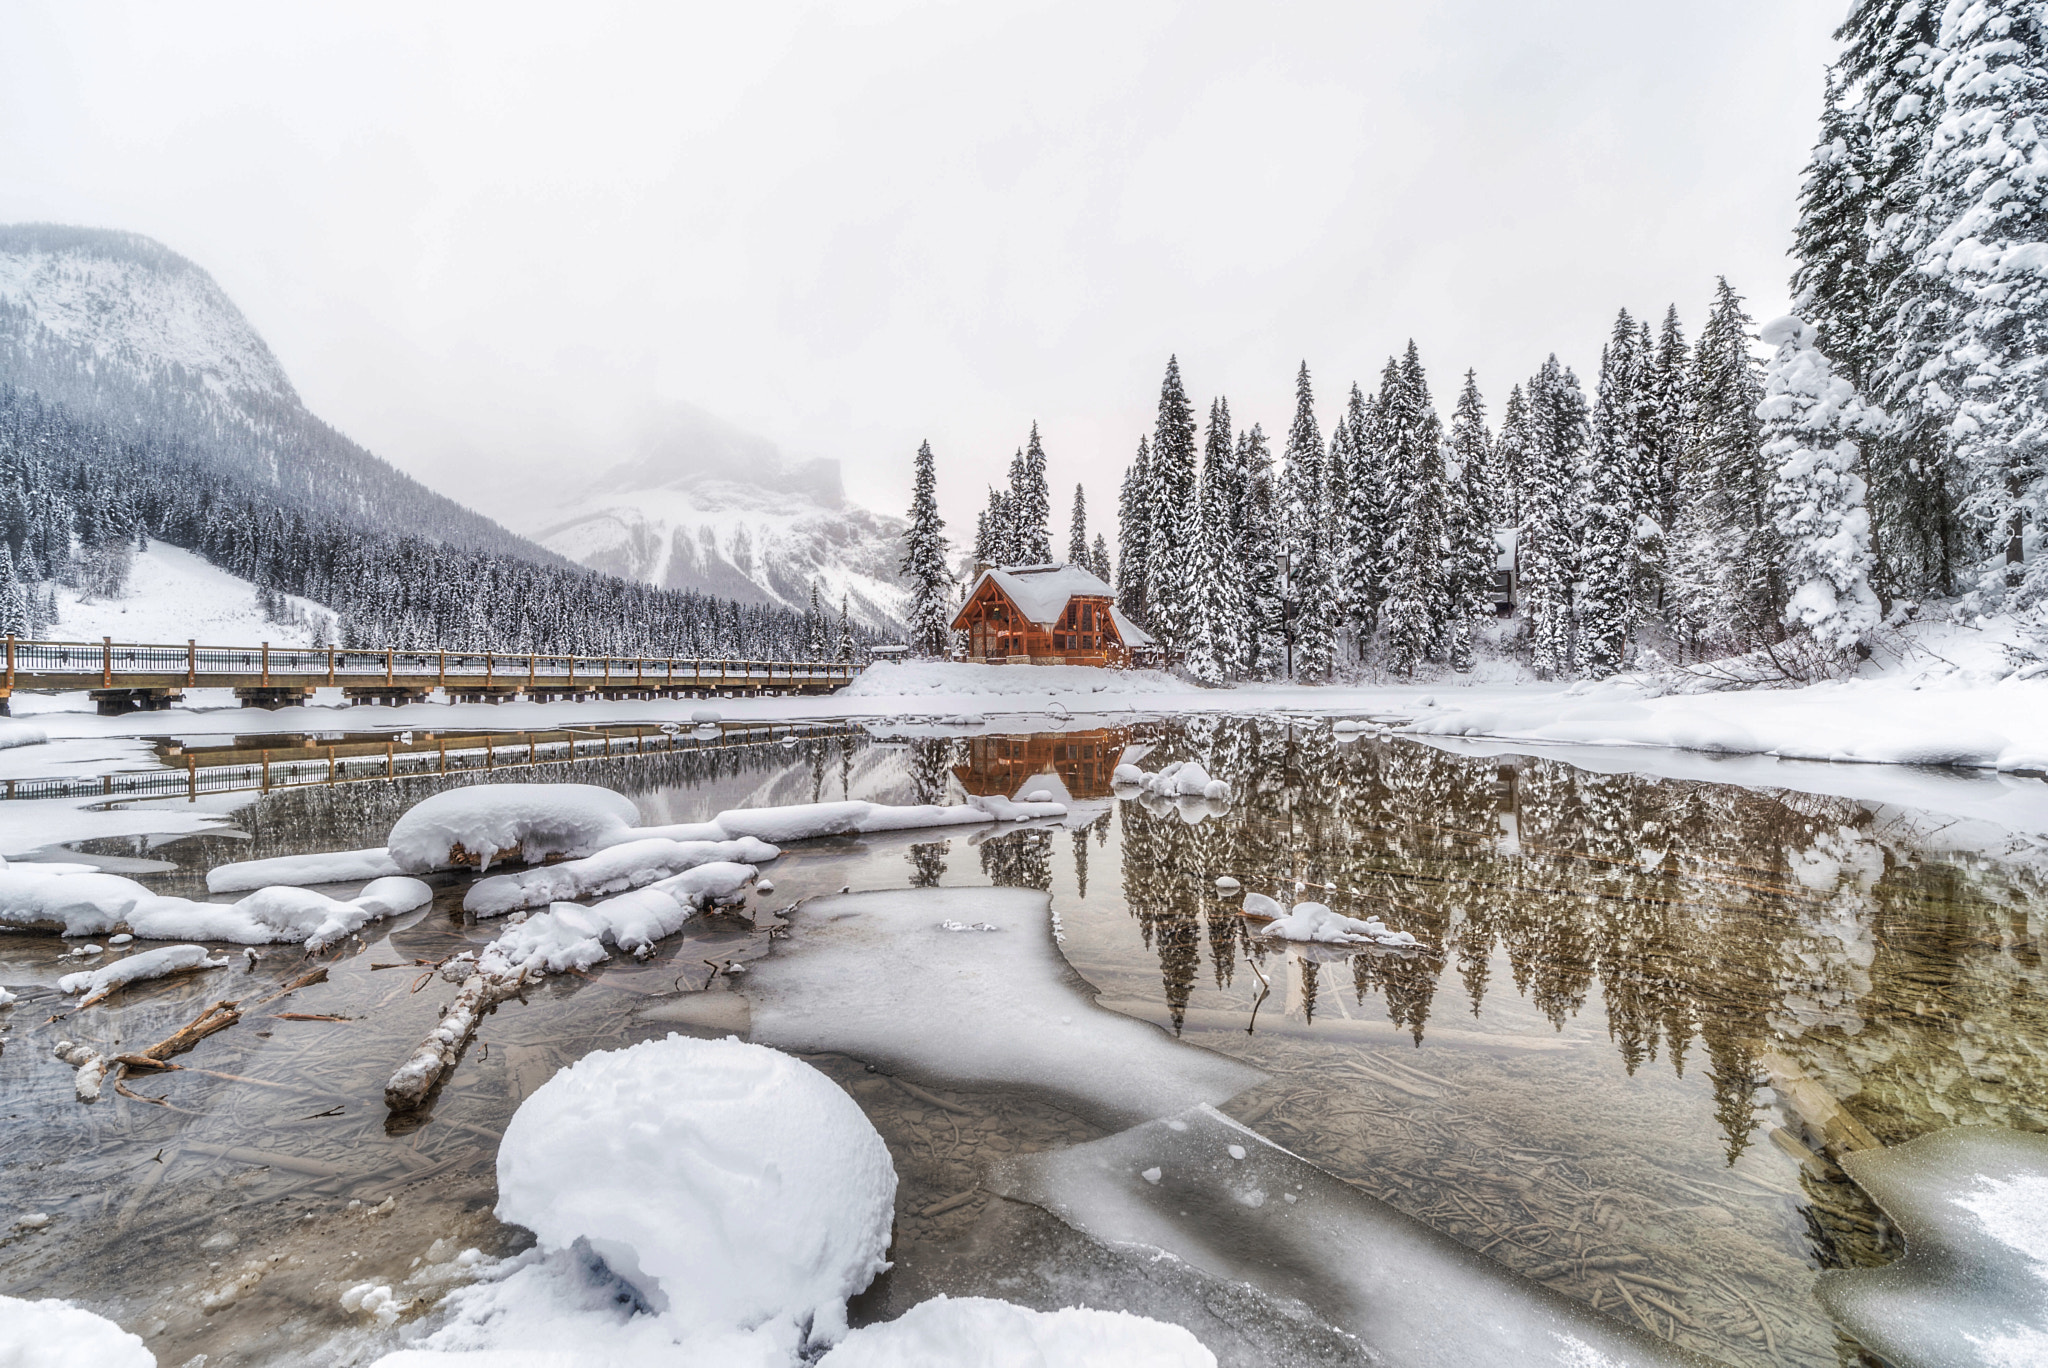 ZEISS Distagon T* 15mm F2.8 sample photo. Winter days in yoho national park that saw snows , clearing conditions when i was by emerald lake photography